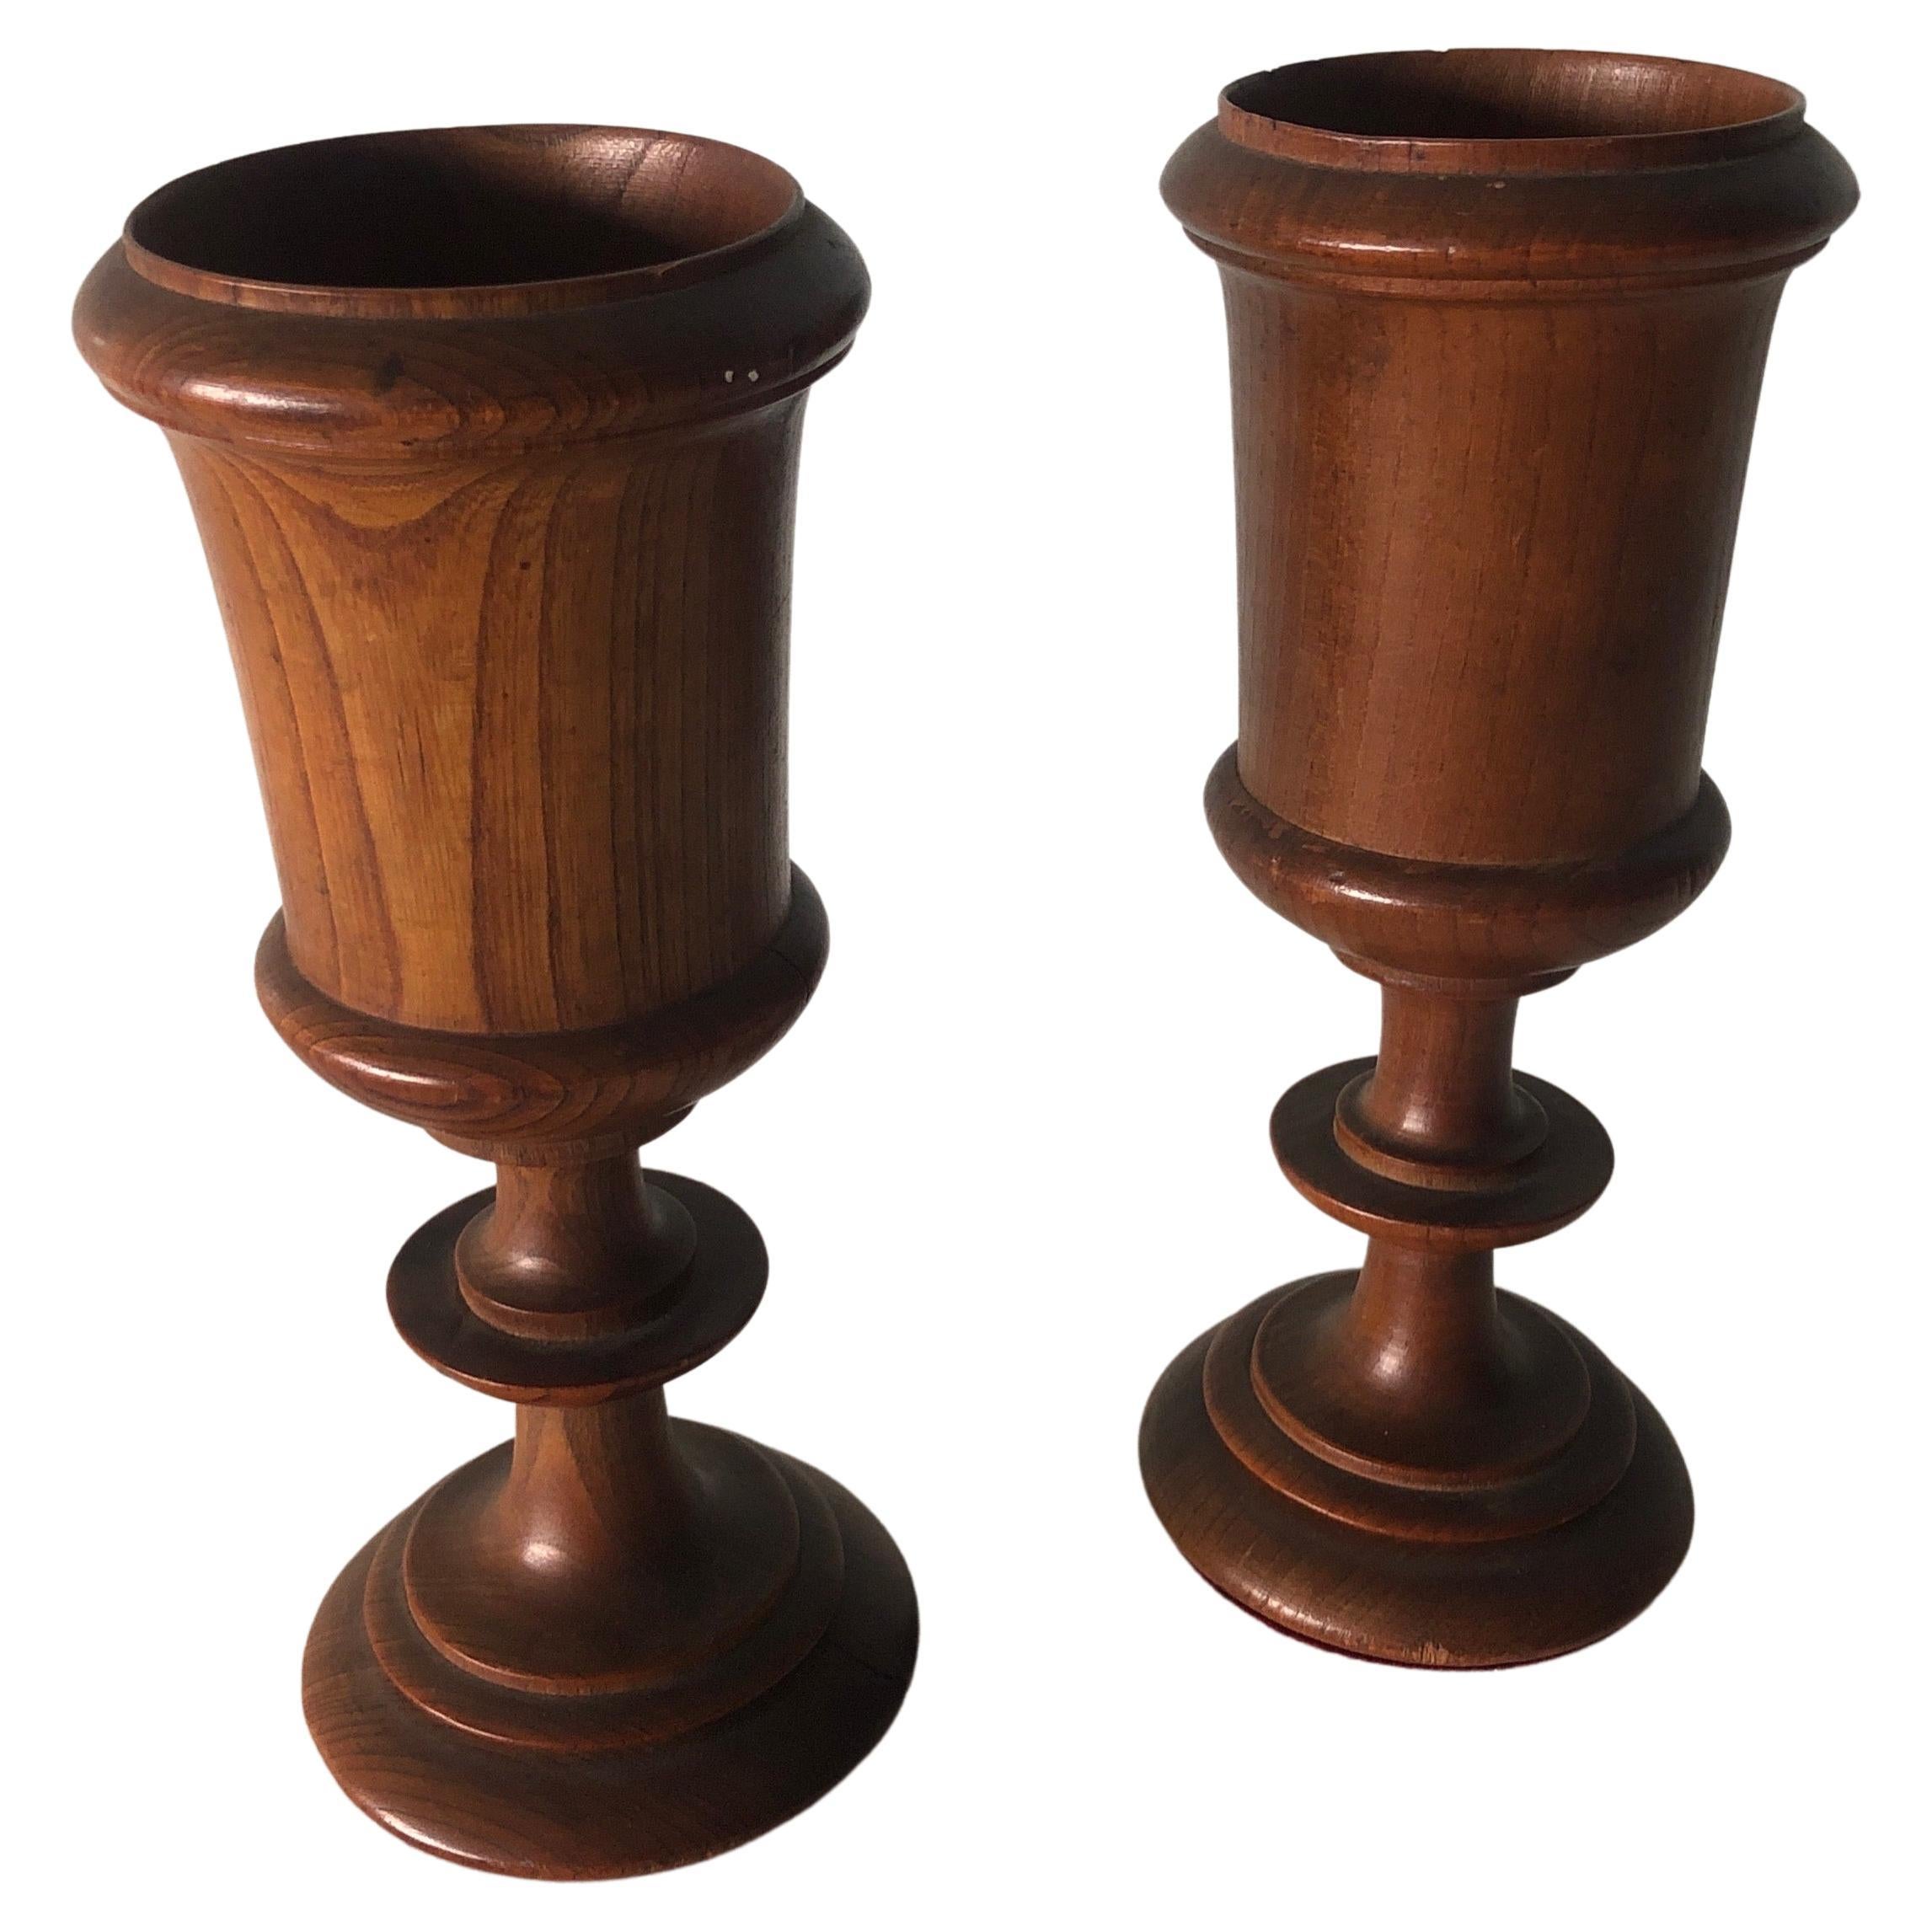 Pair of English Antique Wooden Cups For Sale at 1stDibs